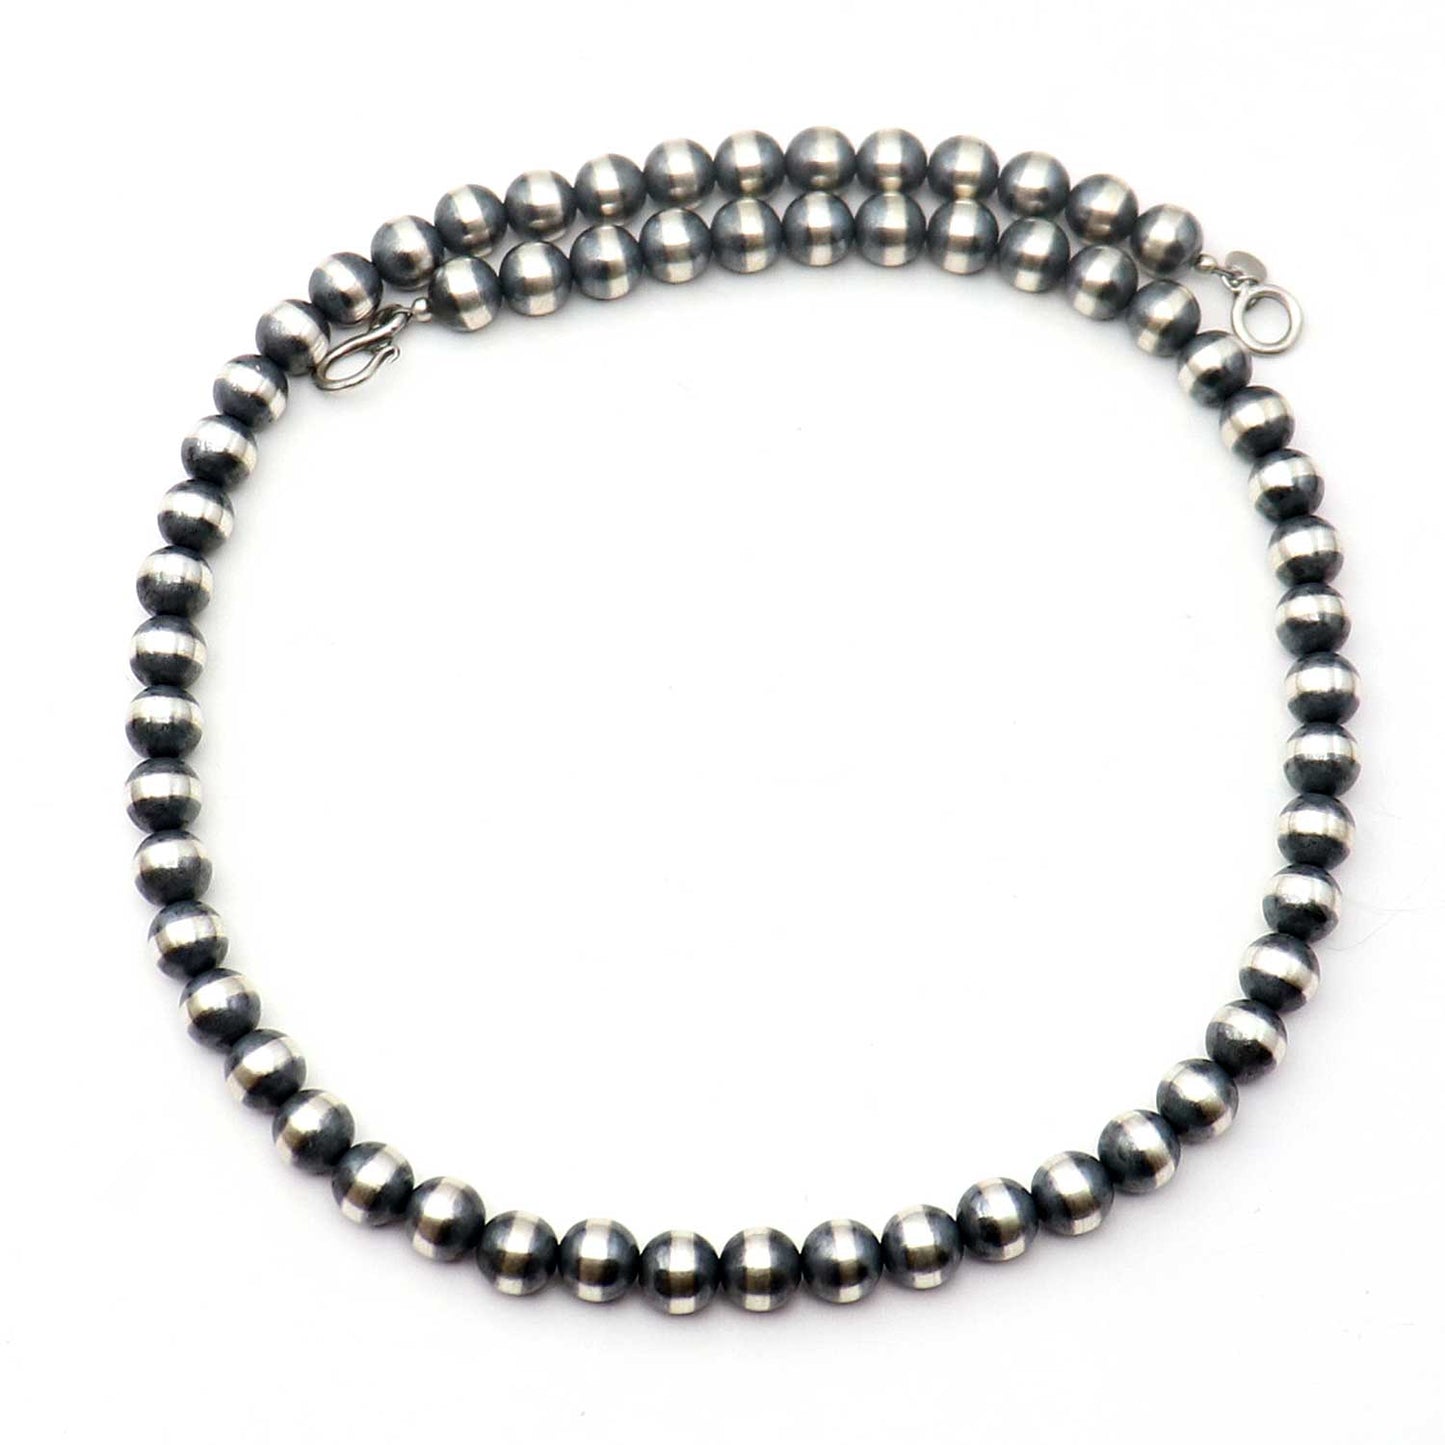 24" 10 mm Sterling Silver Pearls